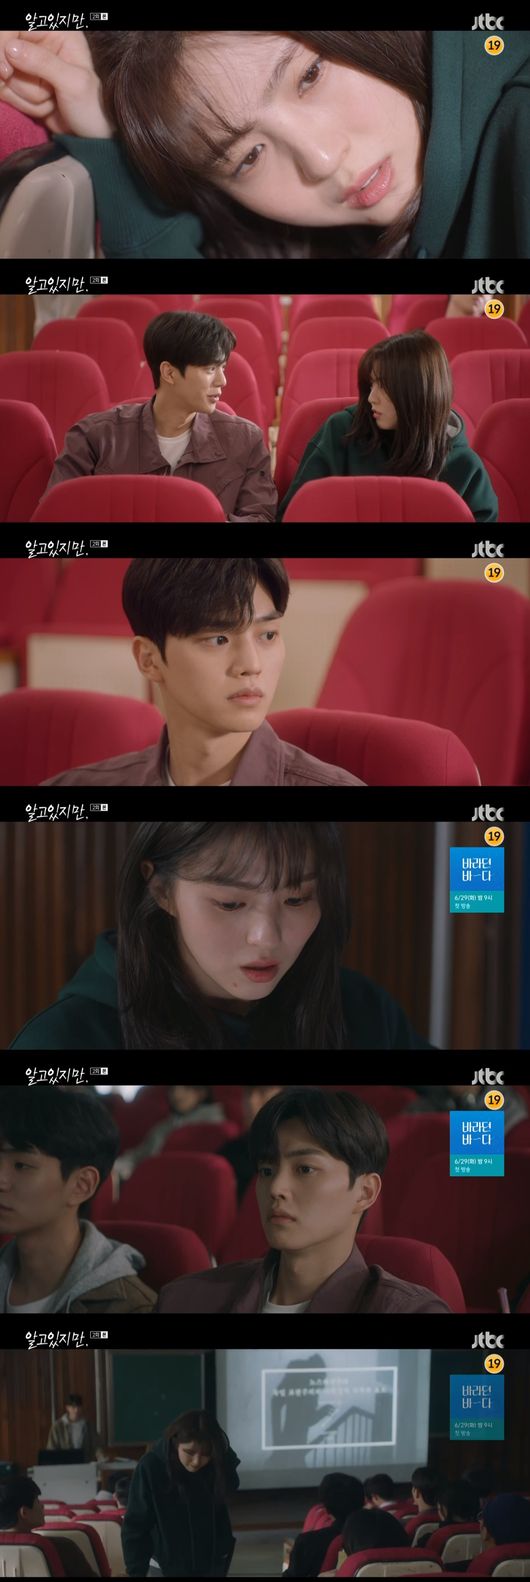 Han So Hee and Song Kang finally kissed.On JTBCs I Know You, which aired on the 26th, Yunabi wiped and kissed the lips of Park Jae-eon, who kissed another woman.On this day, Yunabi tried to show a cool appearance by deciding to hit the iron wall to Park Jae-eun.However, Park Jae-hyuns SMS and sweet words showed his mind gradually, and even Yunabi had a wild dream of sleeping with Park Jae-hyun and was late for the presentation The Lesson.In the afternoon, Yunabi, who participated in The Lesson, met Park Jae-eon, who sat next to Yunabi and listened to The Lesson, and Yunabi was suffering from menstrual pain.Yunabi asked Ohlightna for a sanitary pad, but she could not confirm the SMS.Yunabi told Park Jae-un during the break of The Lesson, You should go out quickly because the children are out. Park Jae-hyun said, You sometimes suddenly draw me.Yunabi showed a concern for Park Jae-eon.Yunabi began her presentation at The Lesson, but she was troubled by her sudden visit to her period, and eventually Yunabi came out with her bag behind her.At that time, Park Jae-eon followed Yunabi and Park Jae-eon tied his outer clothes to Yunabi. Yunabi thought upsetly, saying, I want to cry and why do I want to cry?Yunabi asked, Are you going to tell the children? Park Jae-hyun asked, Are you going to tell the children when you see the men suddenly tenting in The Lesson?Yunabi said he would not say, Is that the same as that? The two have a secret to know each other again.Youre a thumb tanya, said Yunabi, who watched Yunabi and Park Jae-un SMS. Its not a thumb, but its not a push to push a good girl to me.Things you felt special might not be a big deal for him. Park is kind. There is no exception for anyone.Dont tell me later why you didnt stop me, he said.On the other hand, Yunabi took a kiss with Park Jae-eun as a penalty for turning soju bottle at a scorn meeting, but chose a soju shot instead of kissing.Yunabi was embarrassed to see Park Jae-hyun kissing another woman on the way home from the sneer and children.Park Jae-eon found a hidden Yunabi and approached. Park Jae-eon said, I just played. I was a little sorry I did not get caught. Then Park Jae-eon said, Did not you feel sorry?I wanted to do it with you, he said, approaching Yunabi.Yunabi pushed Park Jae-hyun out and then wiped off Park Jae-hyuns lips with other womans lipstick and kissed him first.Eventually the two kissed hotly and Yunabi thought alone: Thats how Hell Gate opened up.